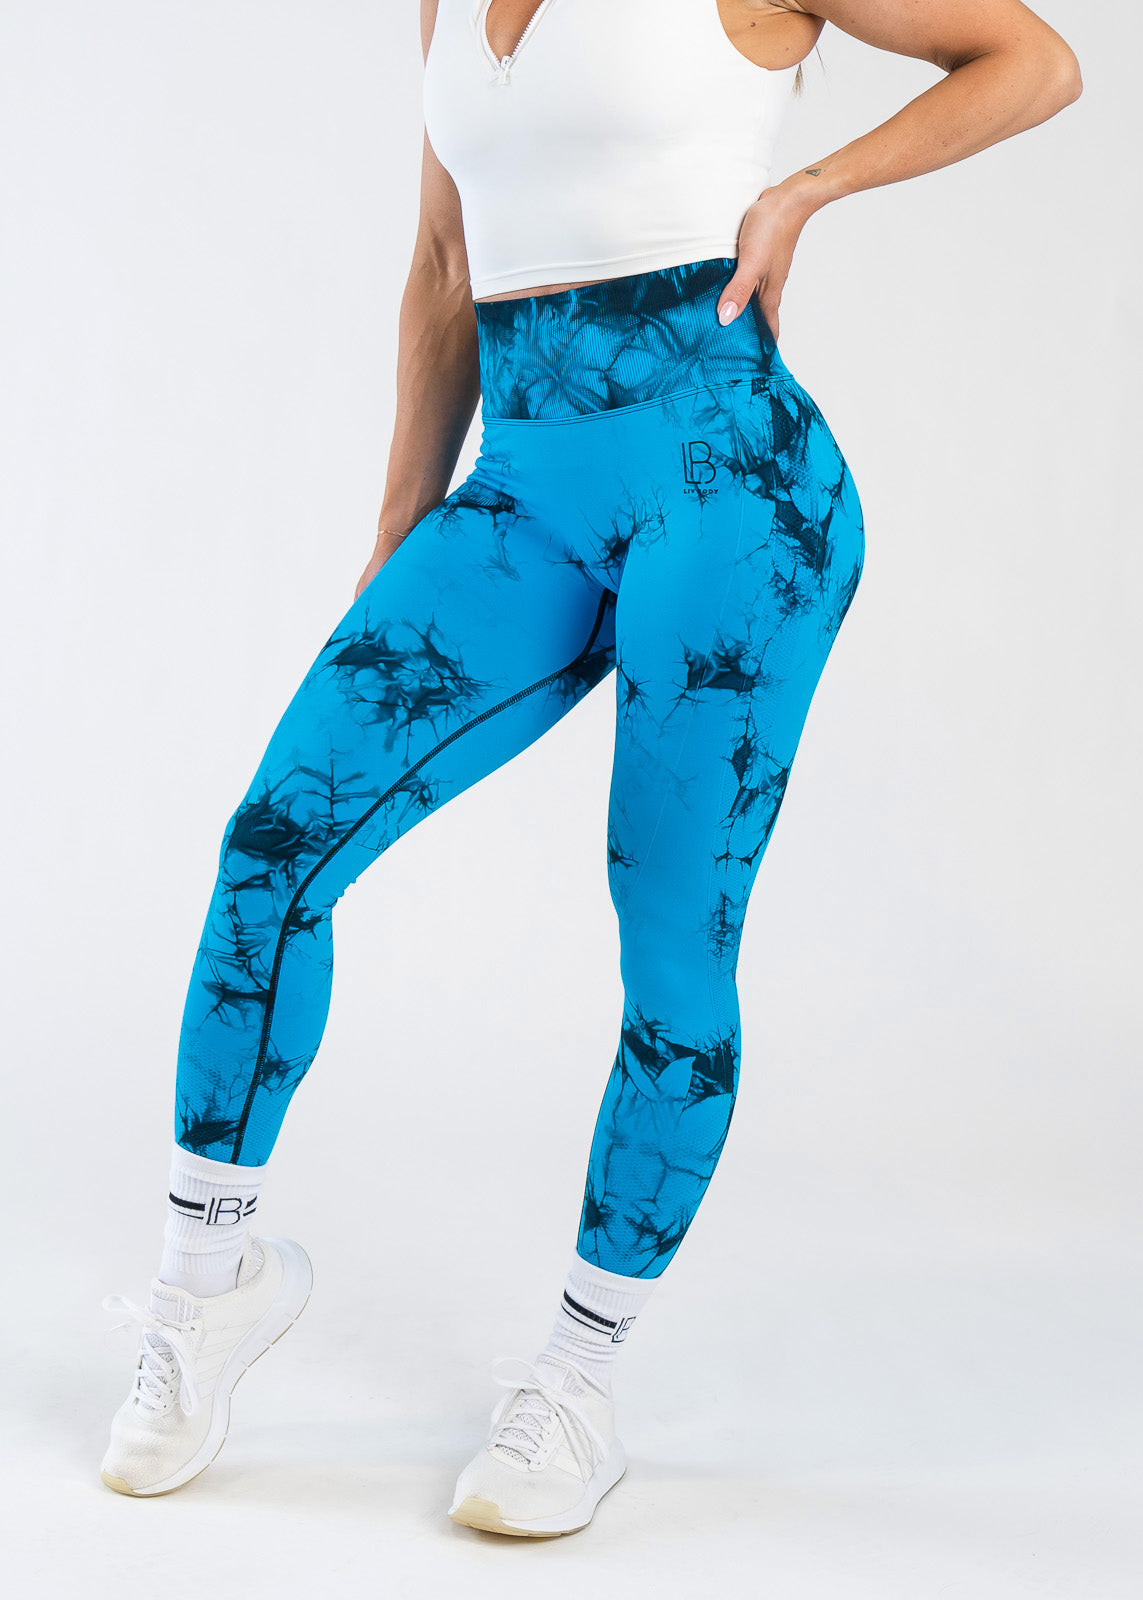 IB Active Buttery Soft Leggings